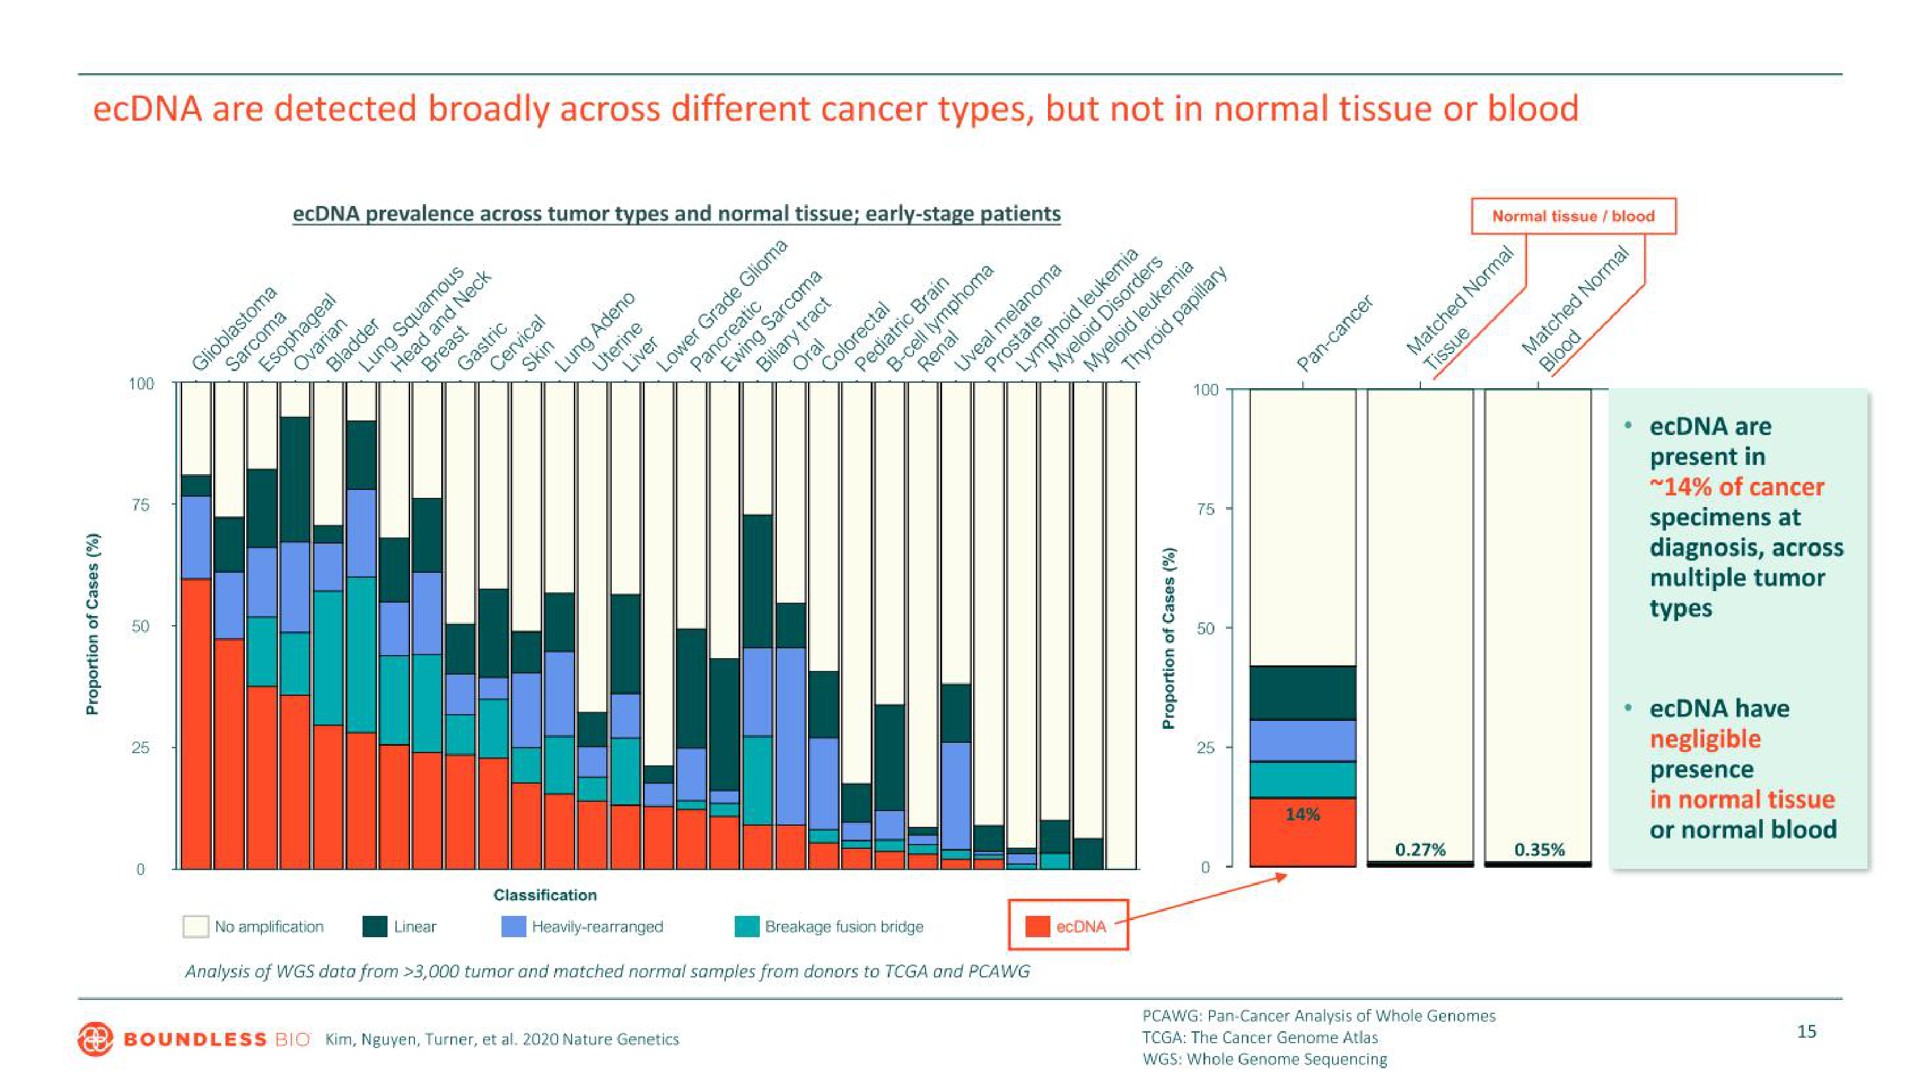 are detected broadly across different cancer types but not in normal tissue or blood | Boundless Bio